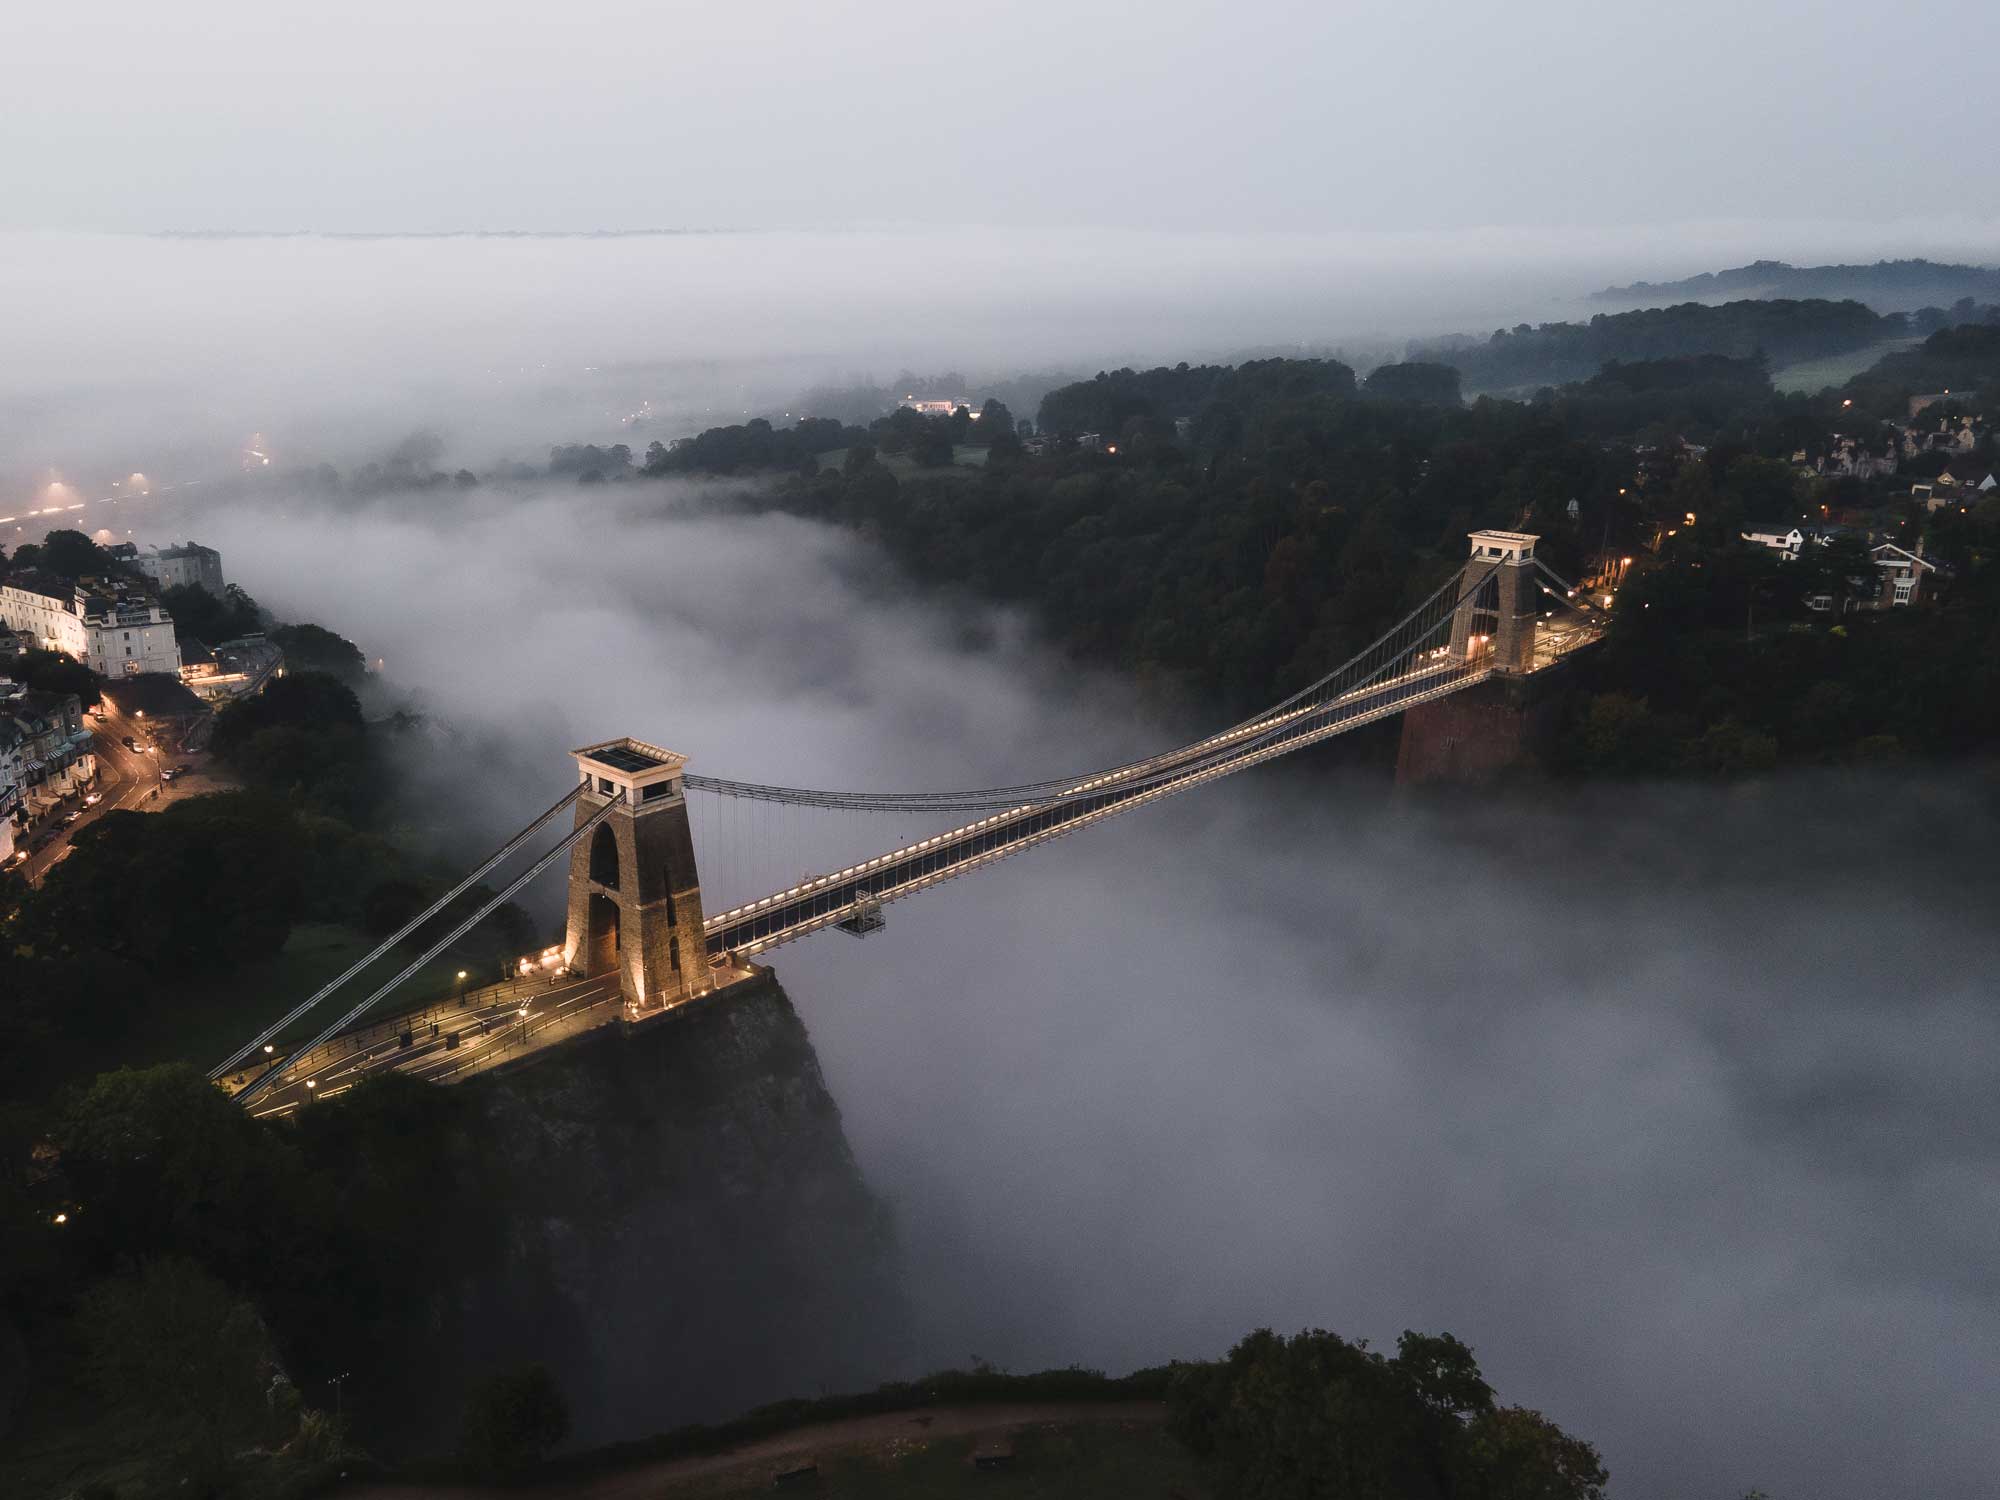 Aerial view of Clifton Suspension Bridge with mist below it